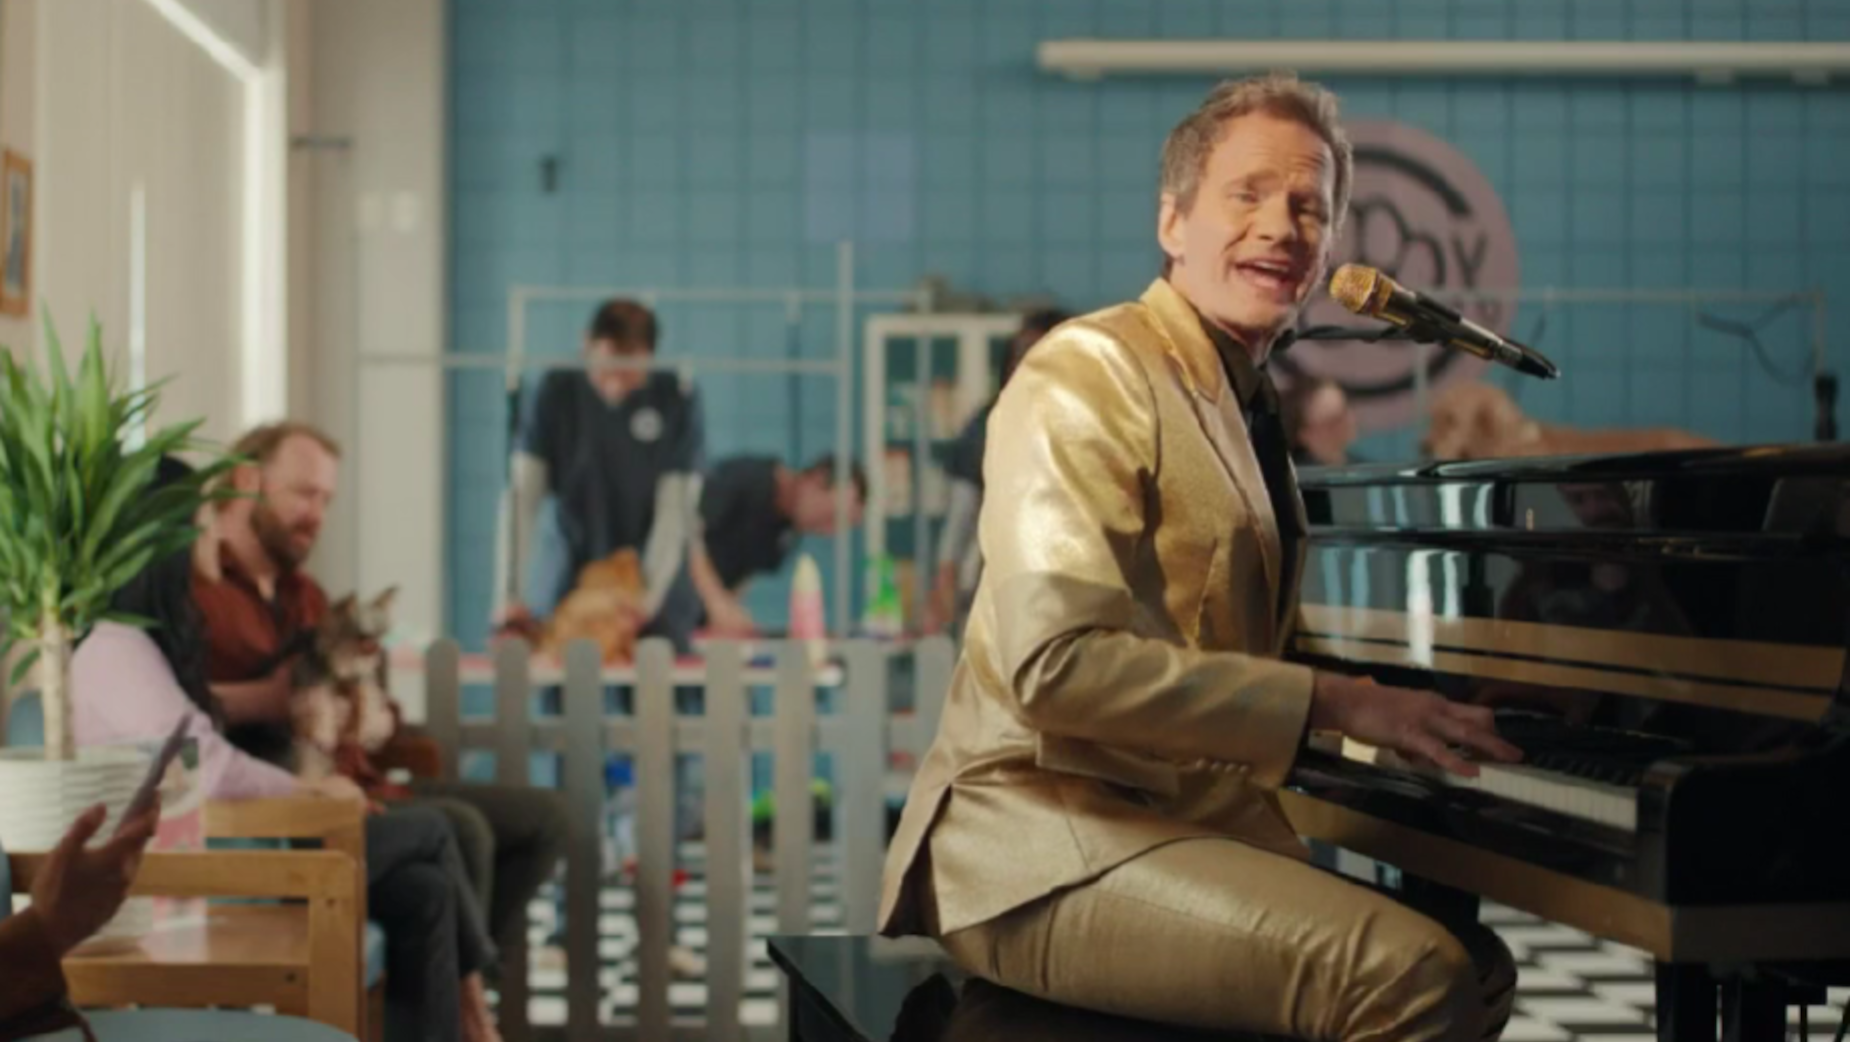 Neil Patrick Harris Sings a Catchy Tune for DraftKings’ Golden Nugget Online Casino | LBBOnline